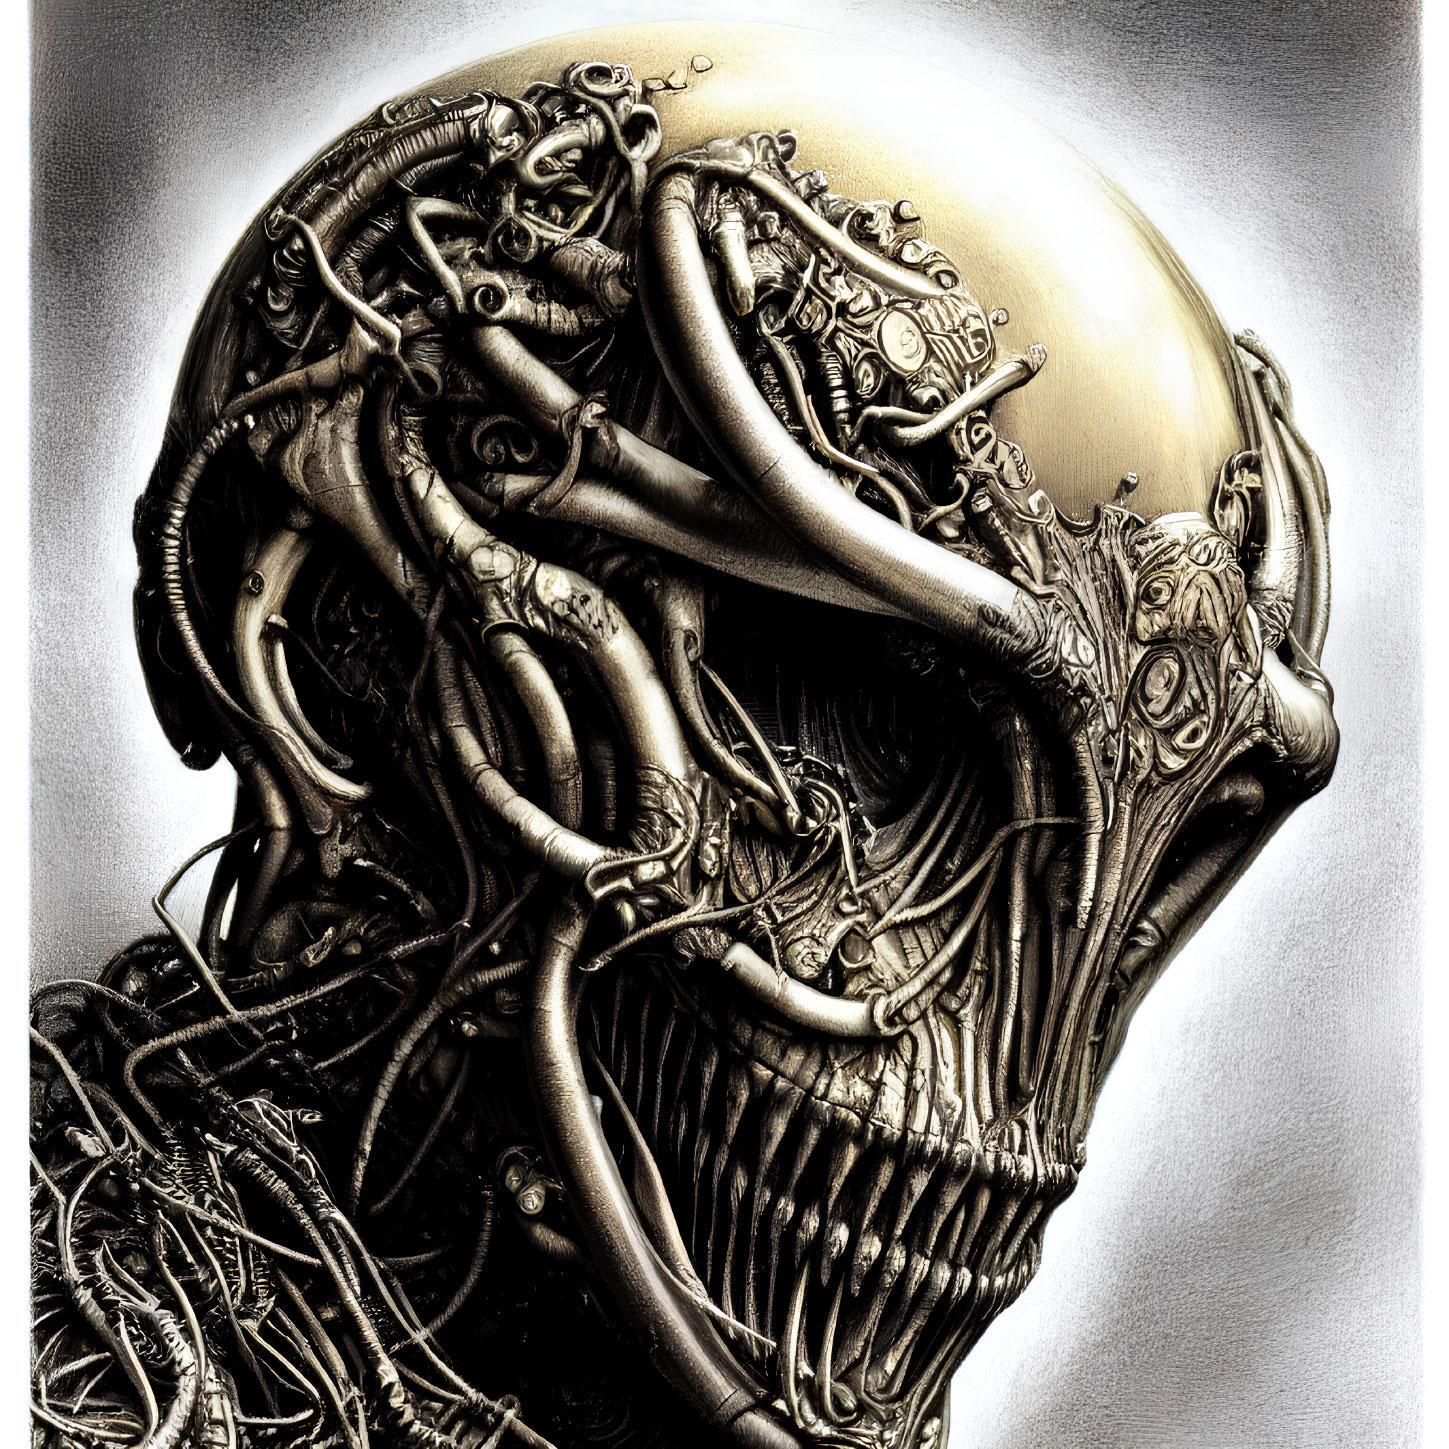 Detailed biomechanical head illustration with alien-like features.